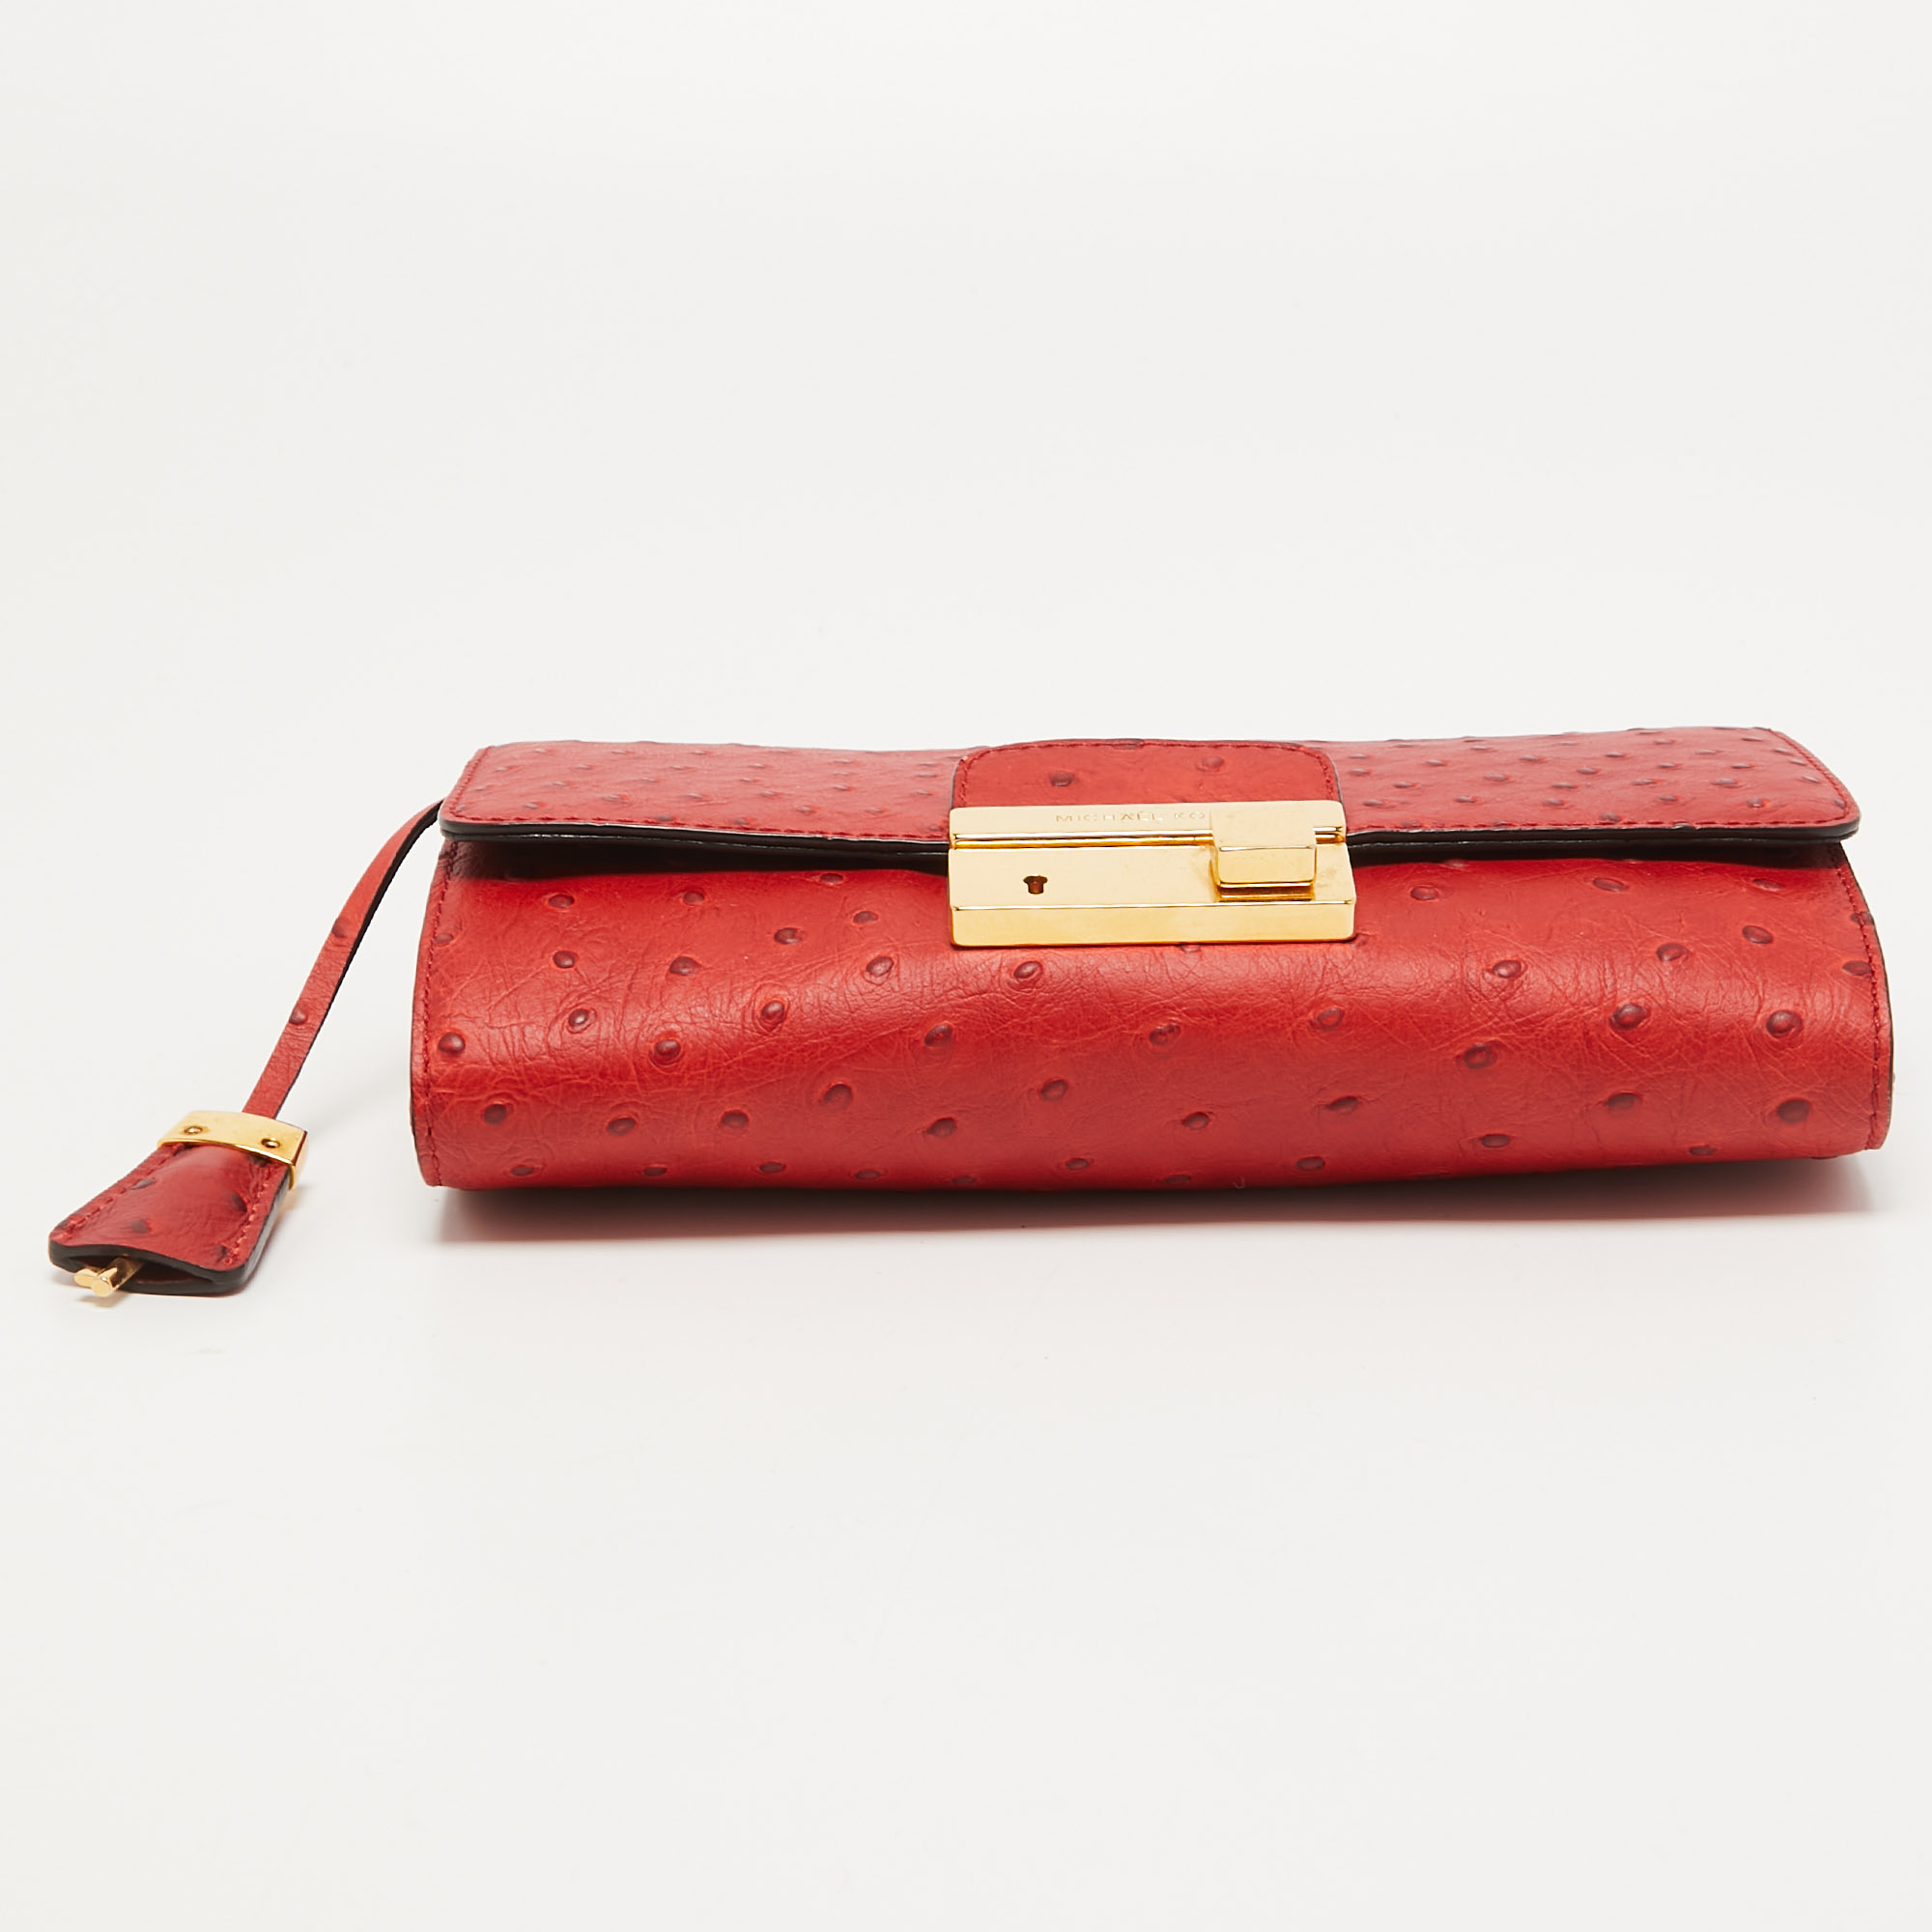 Michael Kors Red Ostrich Embossed Leather Gia Clutch